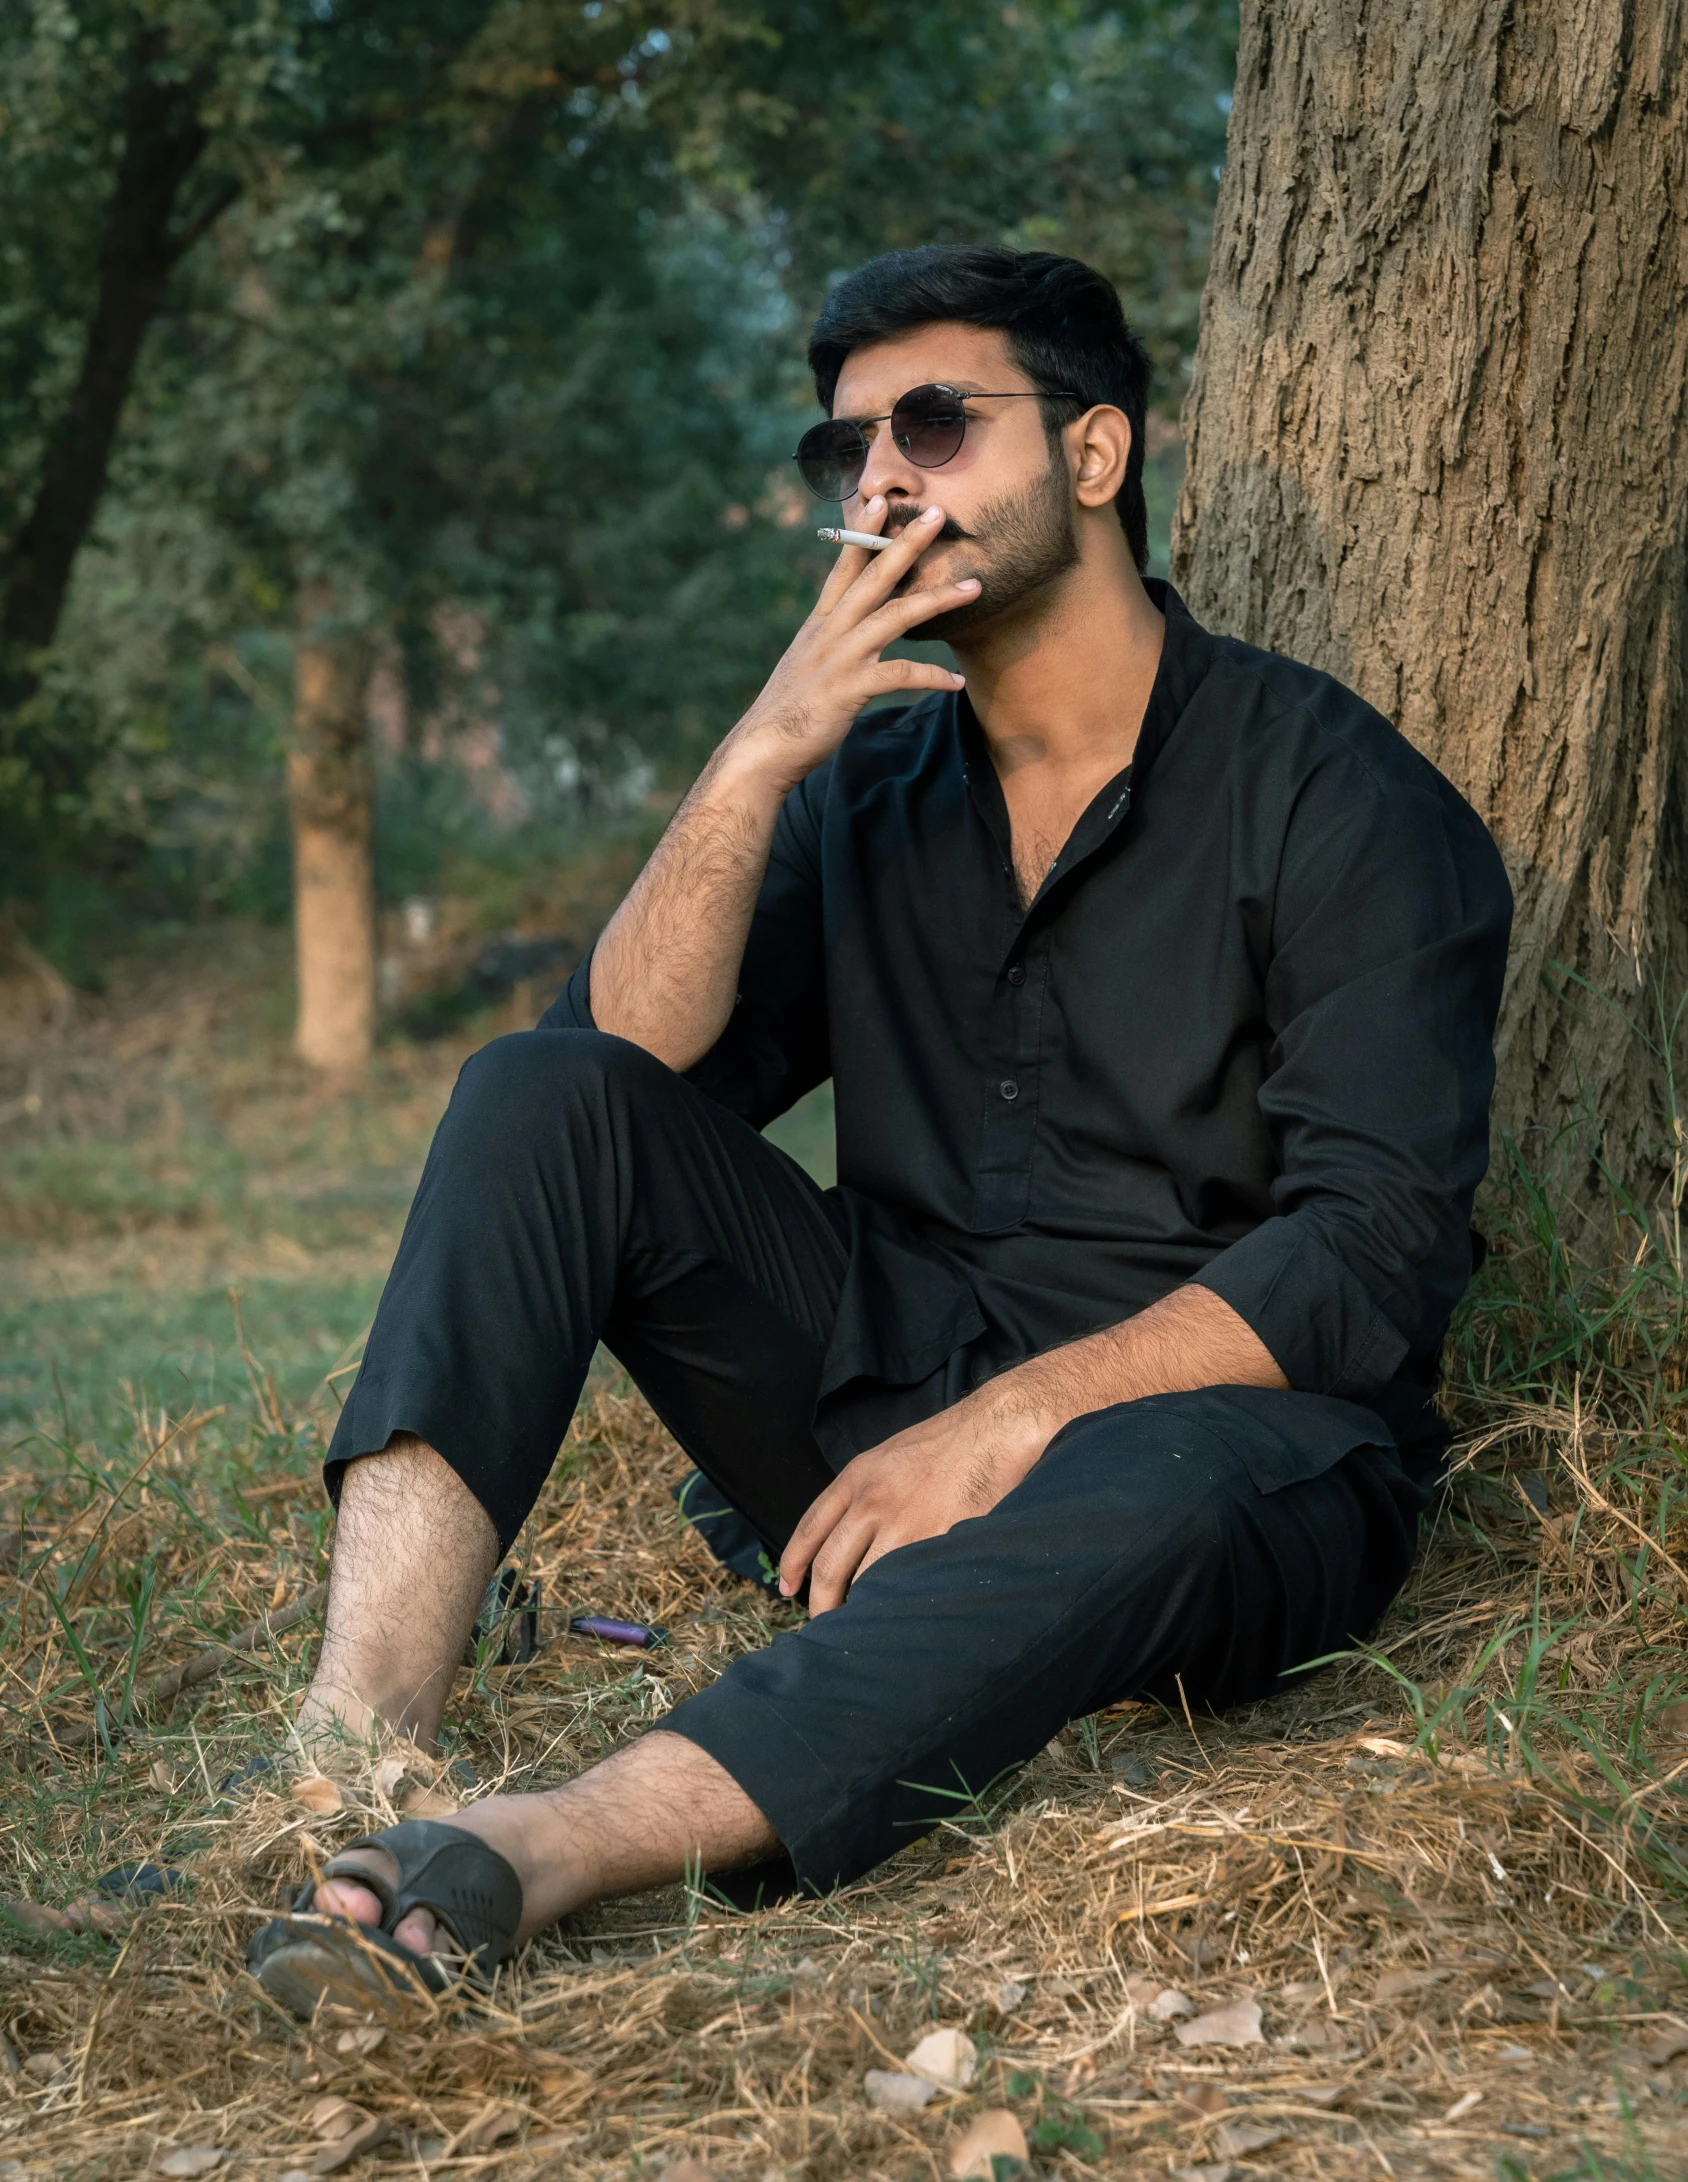 a man sits underneath a tree on the ground with his hand to his face while smoking a cigarette